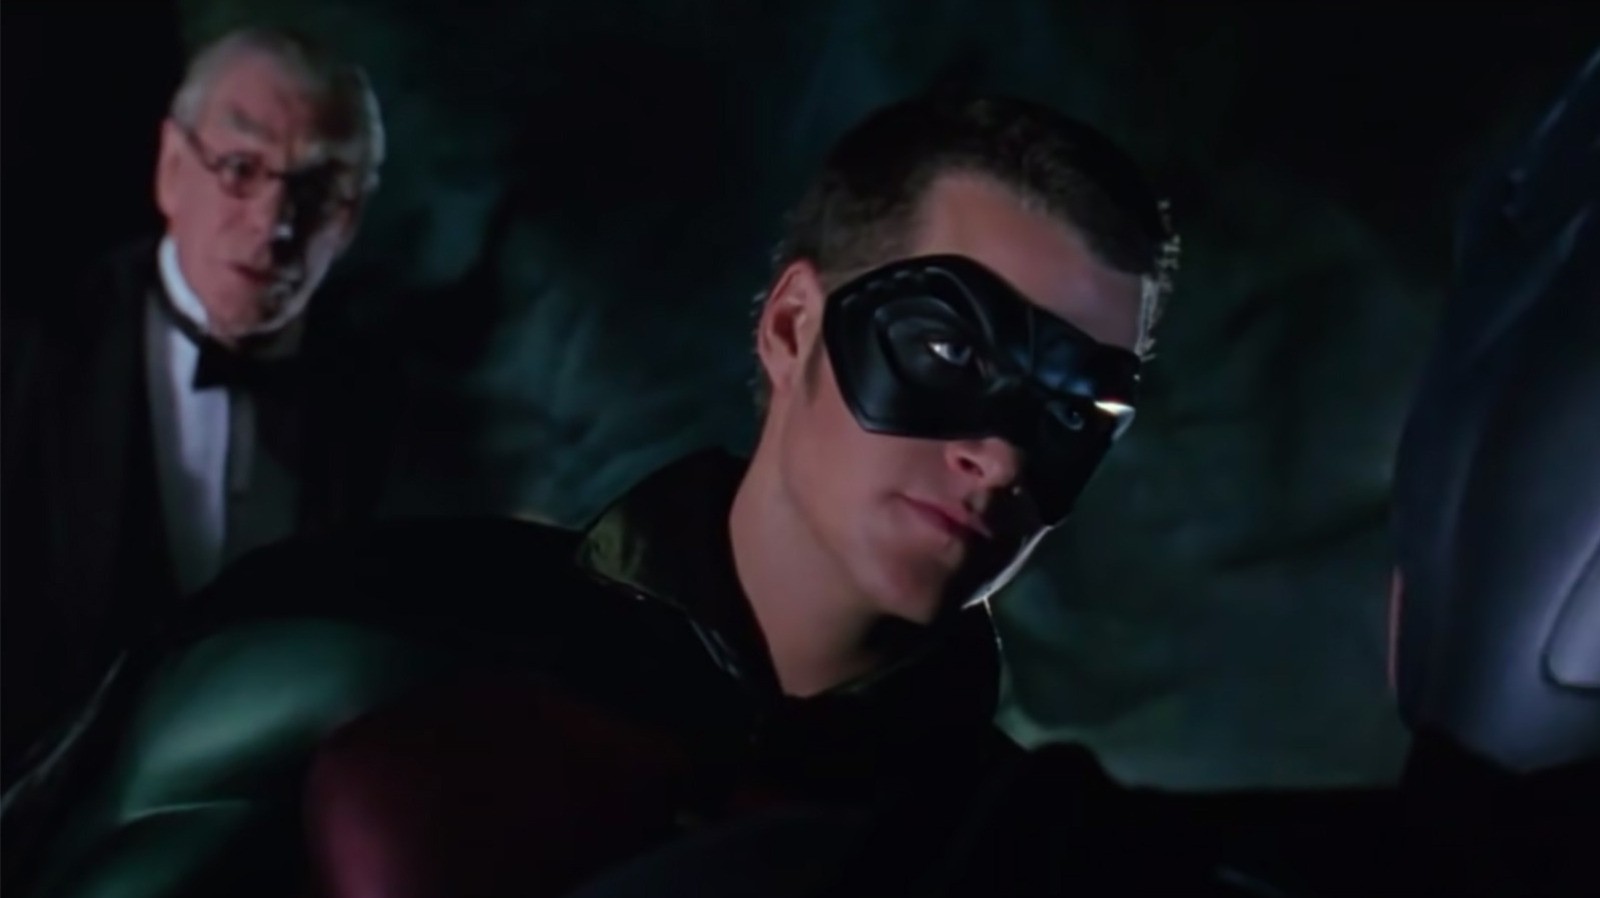 Leonardo DiCaprio was offered the role of Robin in Batman Forever